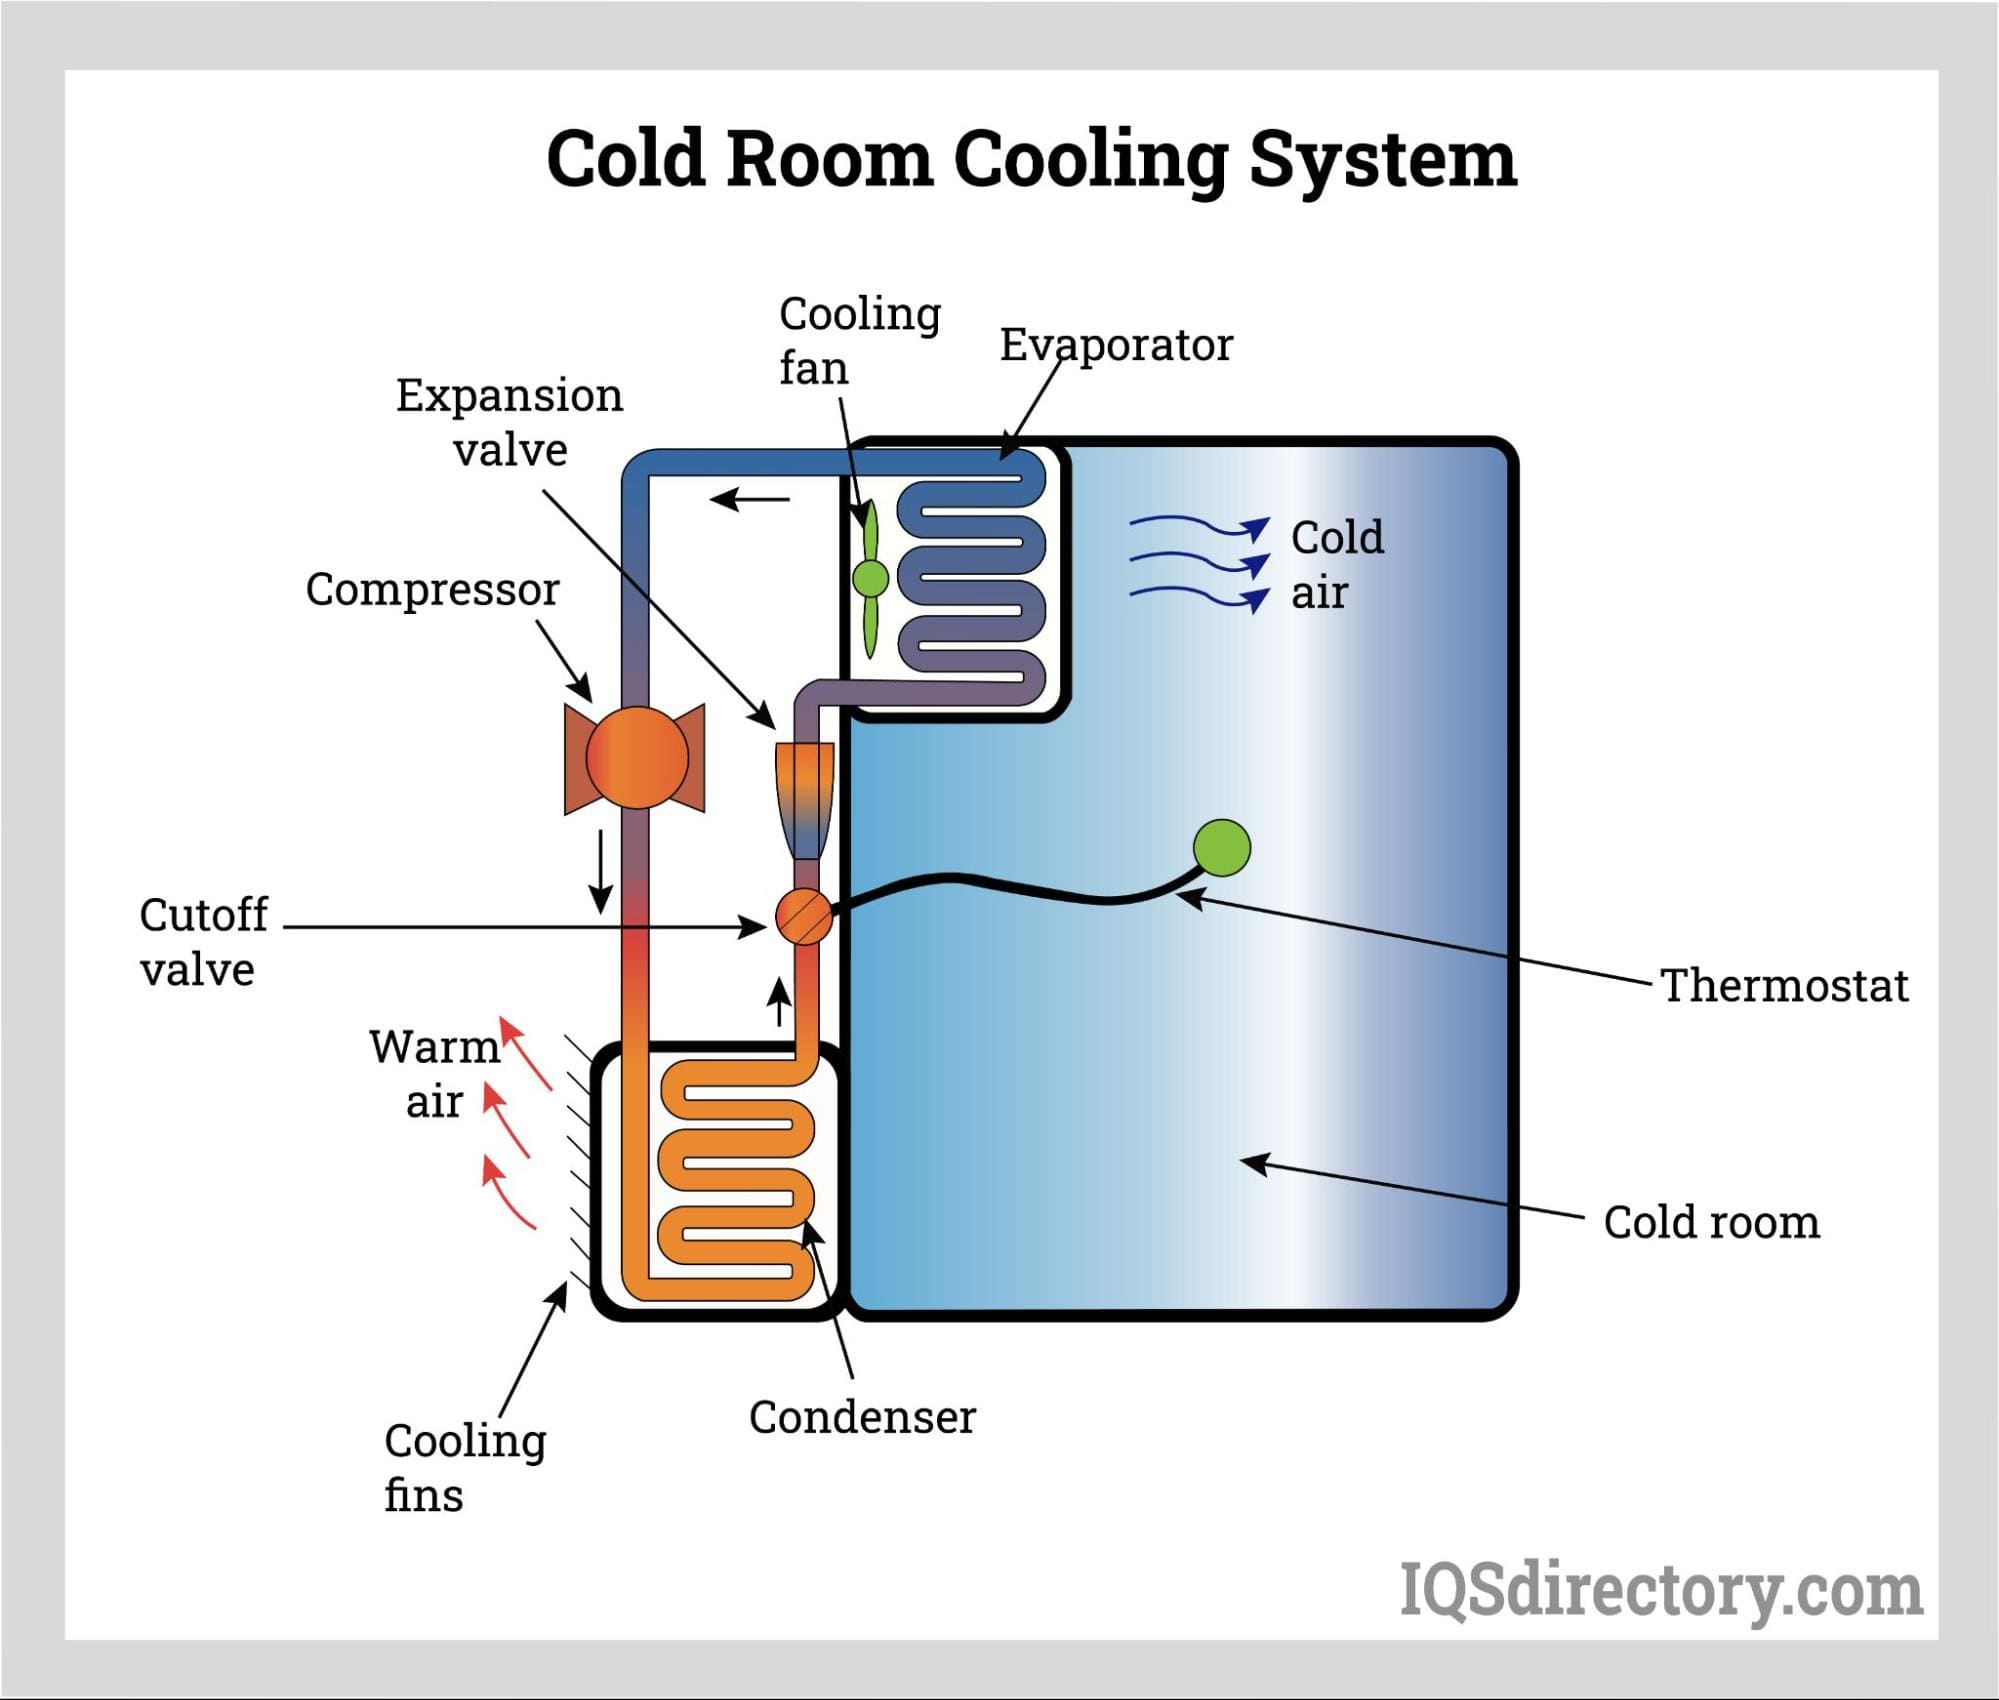 Cold Room Cooling System